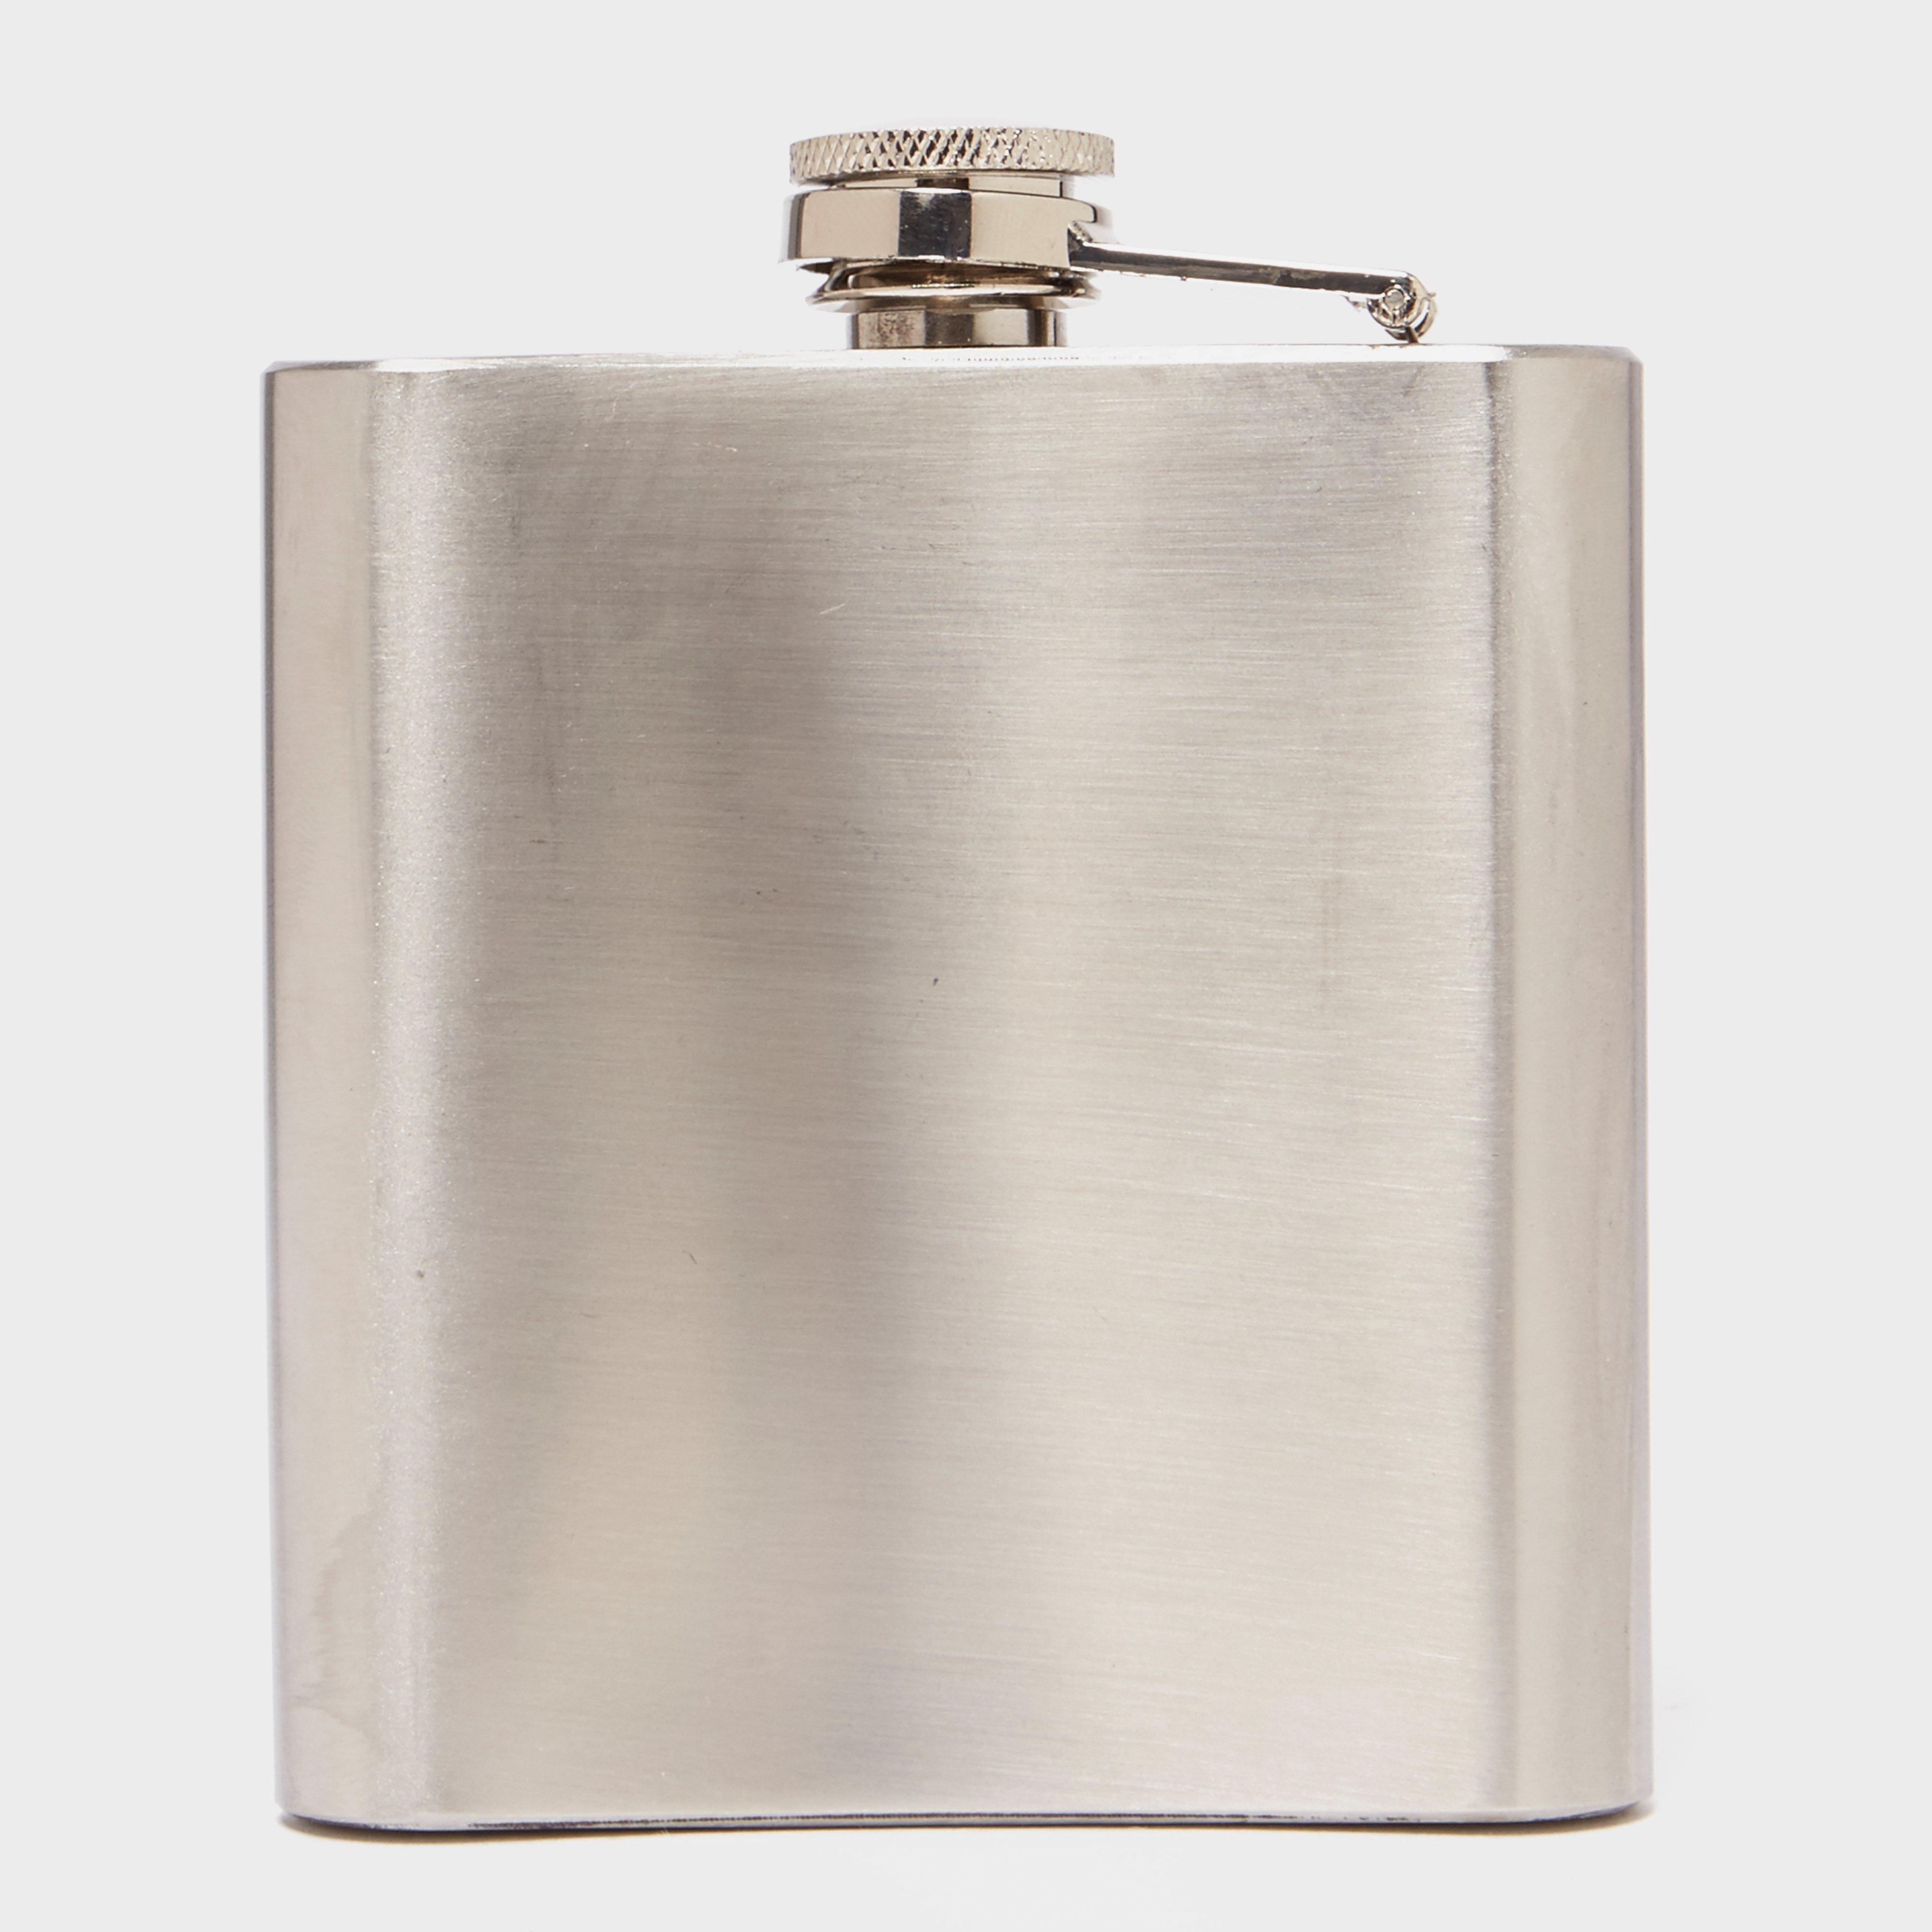 Eurohike Stainless Steel 0.6oz Hip Flask Review